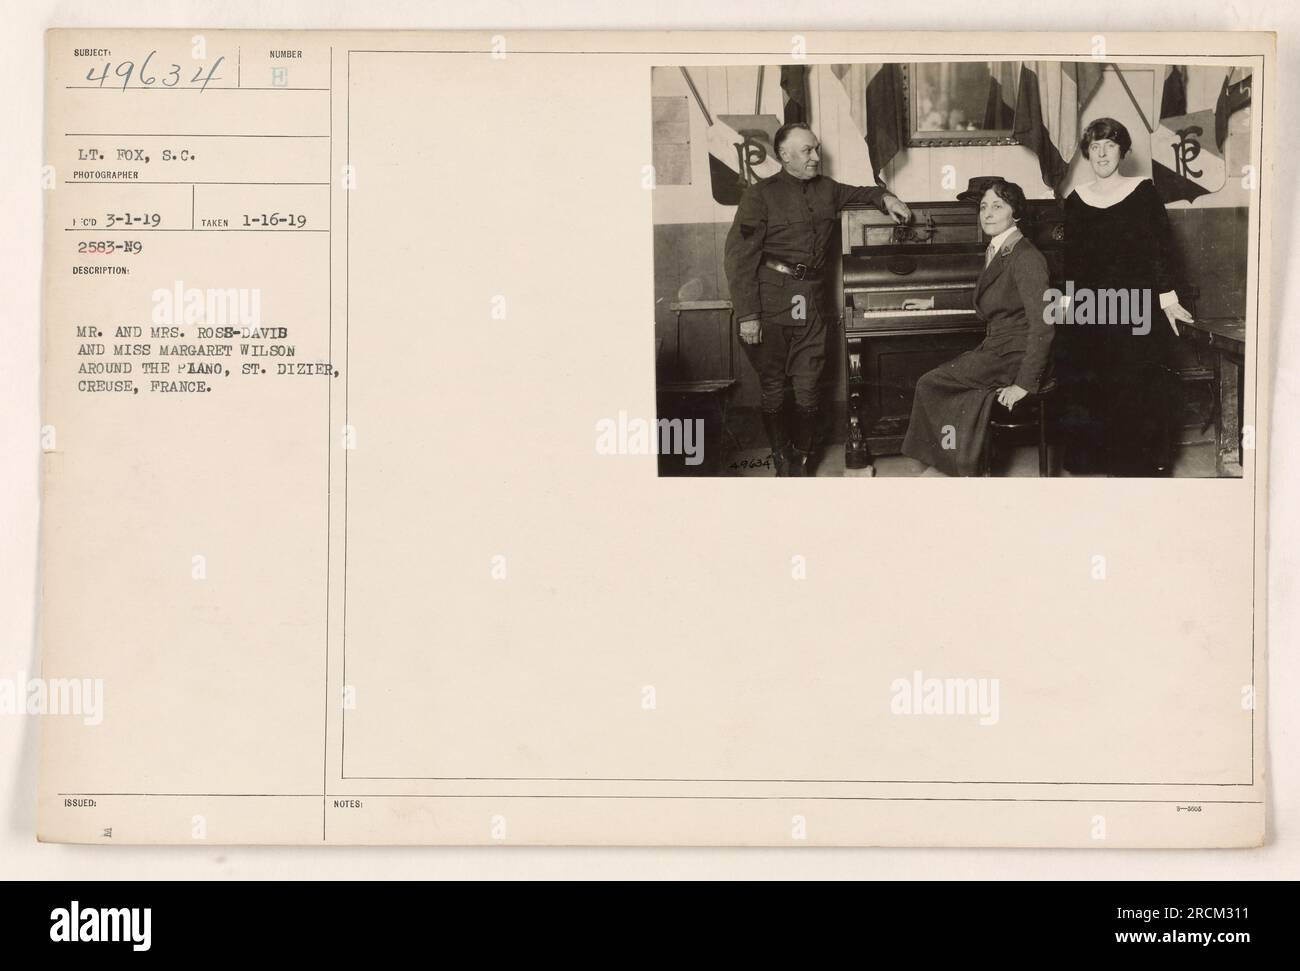 Mr. and Mrs. Ross-David and Miss Margaret Wilson gathered around a piano in St. Dizier, Creuse, France. The photo was taken on January 16, 1919, by Lt. Fox and received on March 1, 1919. The image is numbered 49634 and its description is 2583-19. Stock Photo